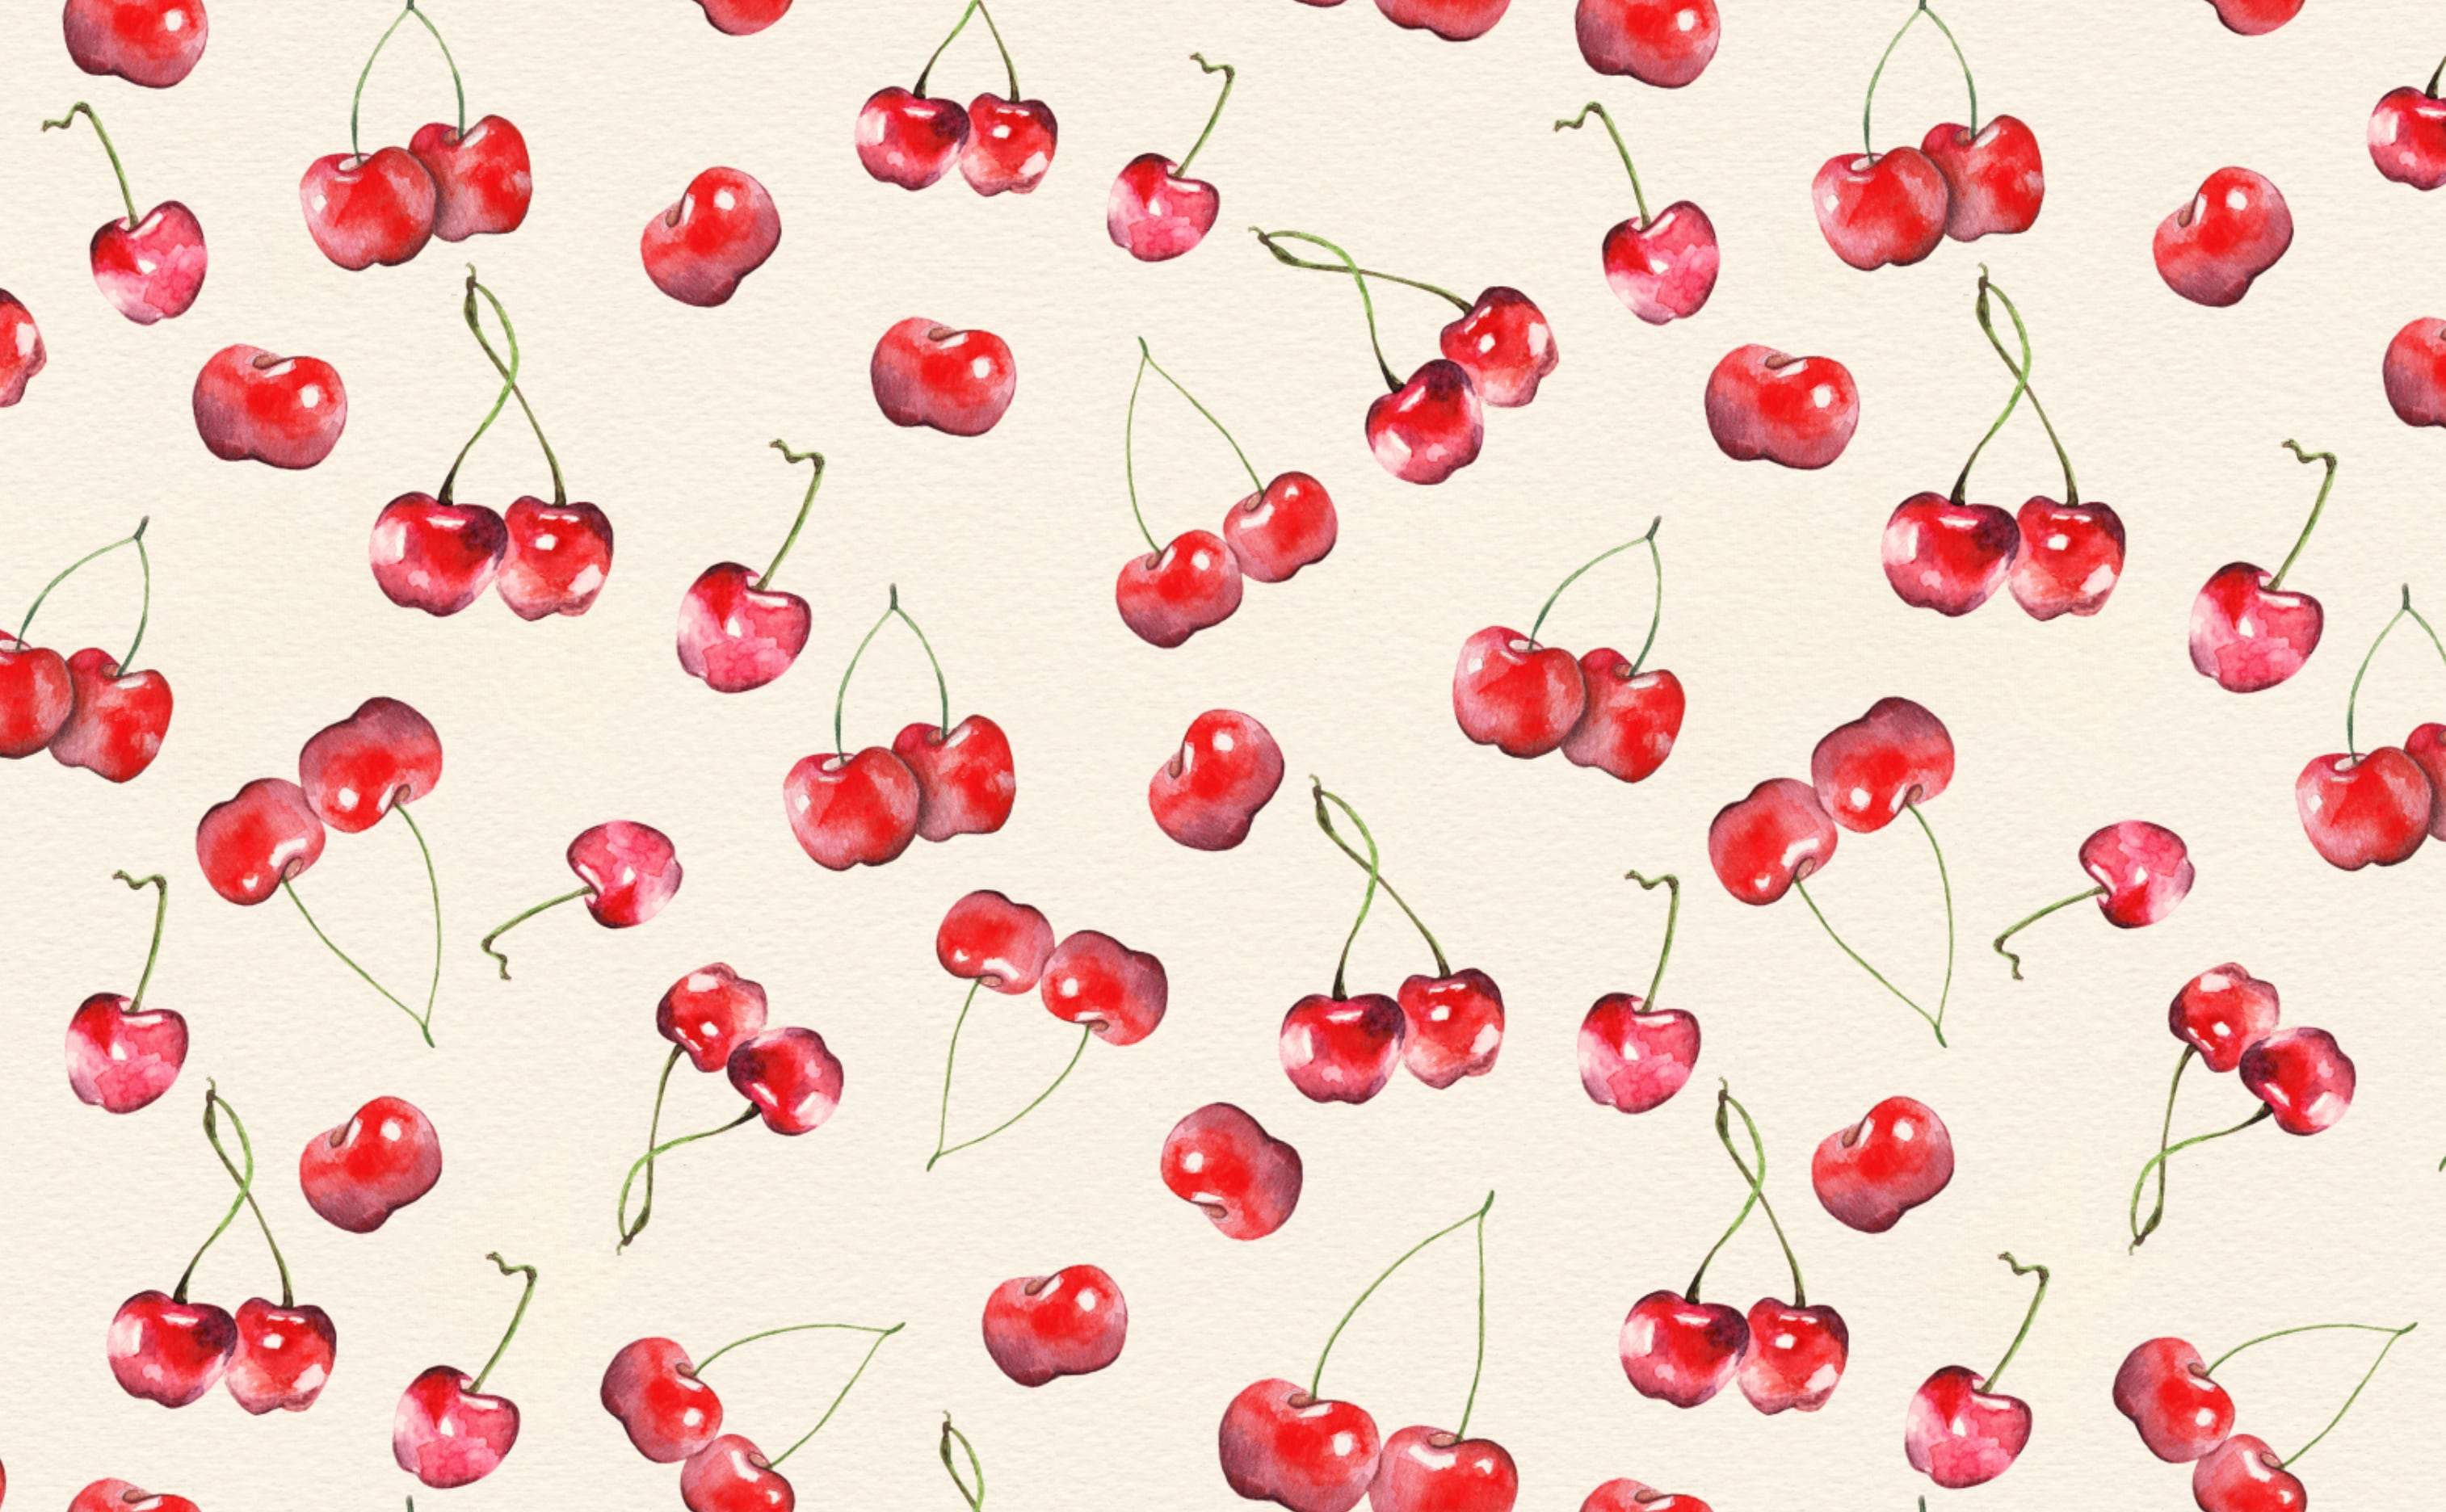 Watercolor illustration of red cherries on a white background - Cherry